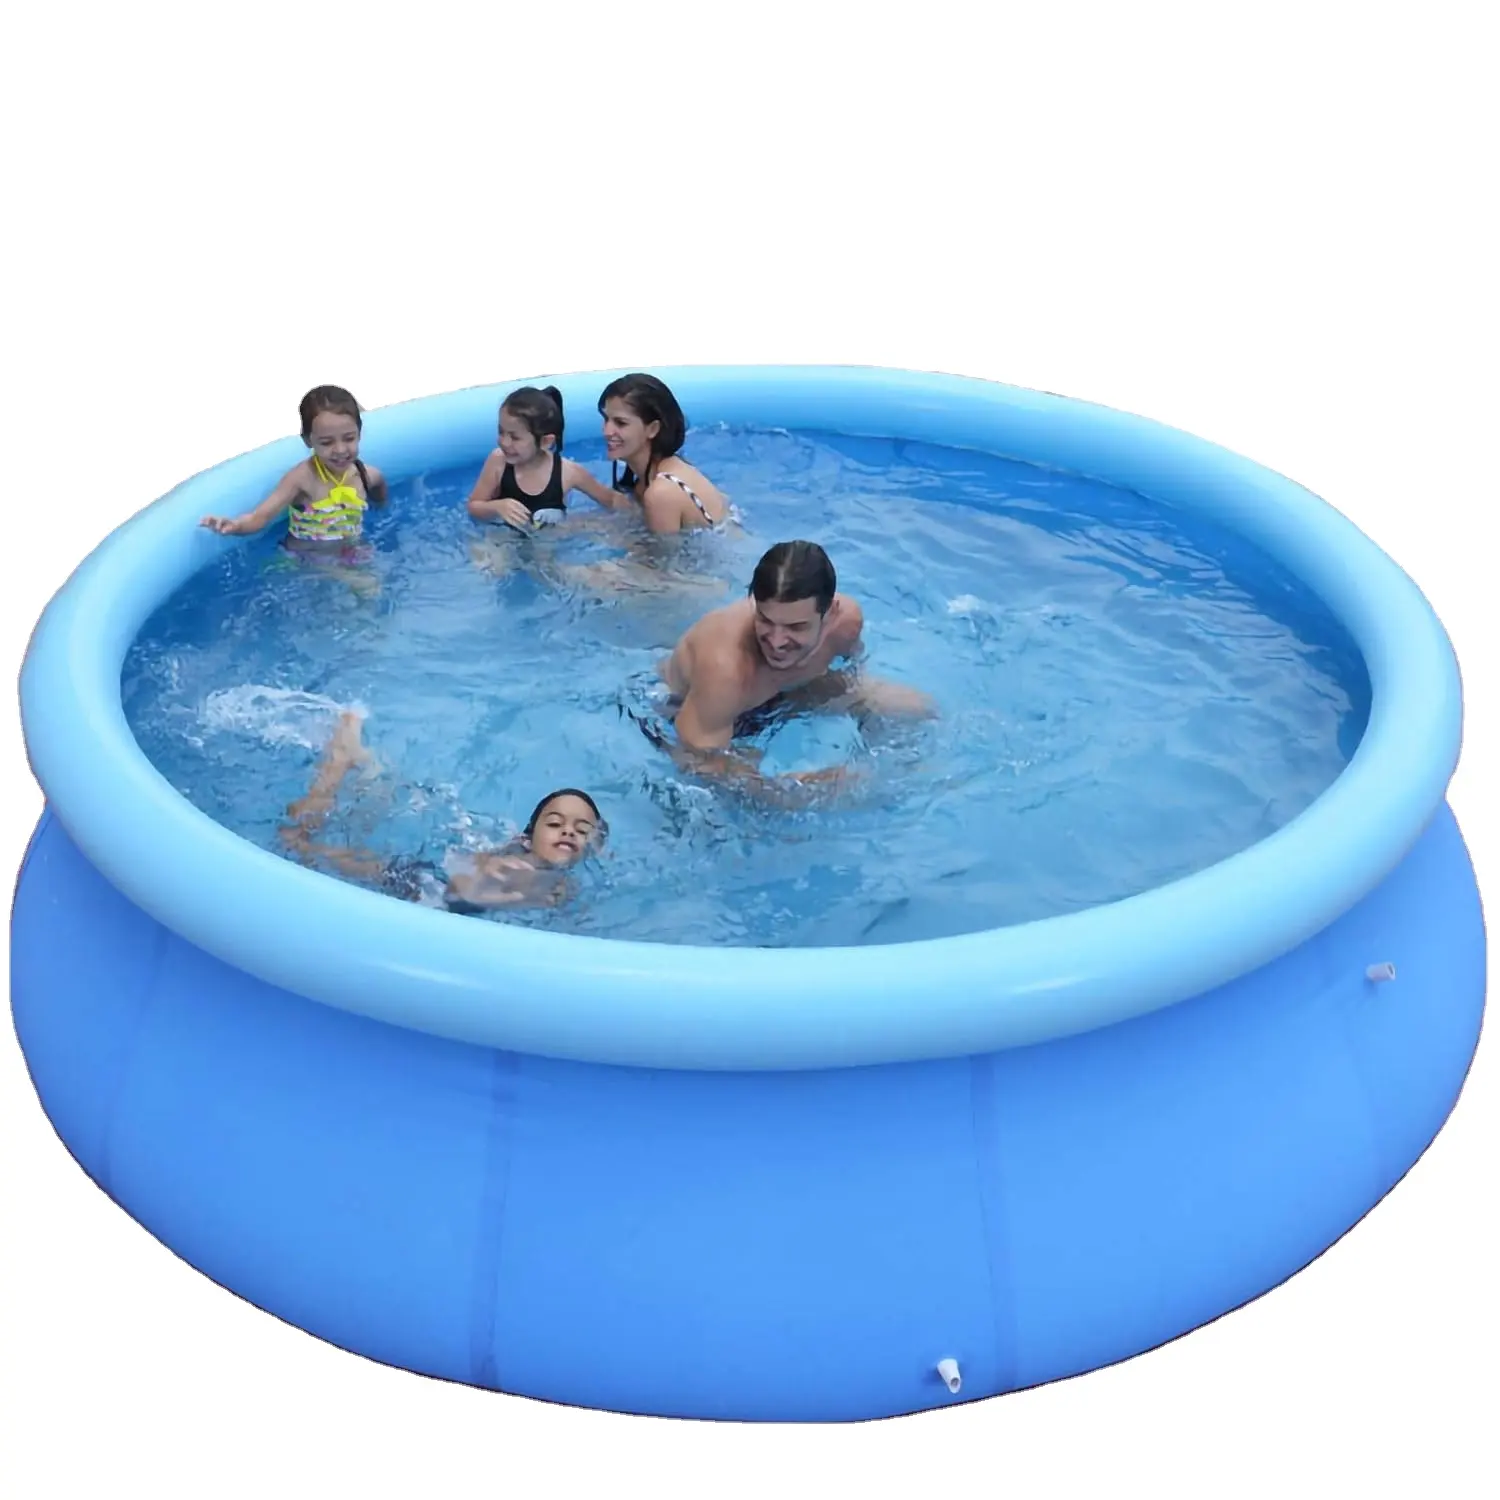 Inflatable Swimming Pool for Adults on Summer Holiday Used in Garden Patio Lawn Outdoor Indoor Funny Water Swim Pool